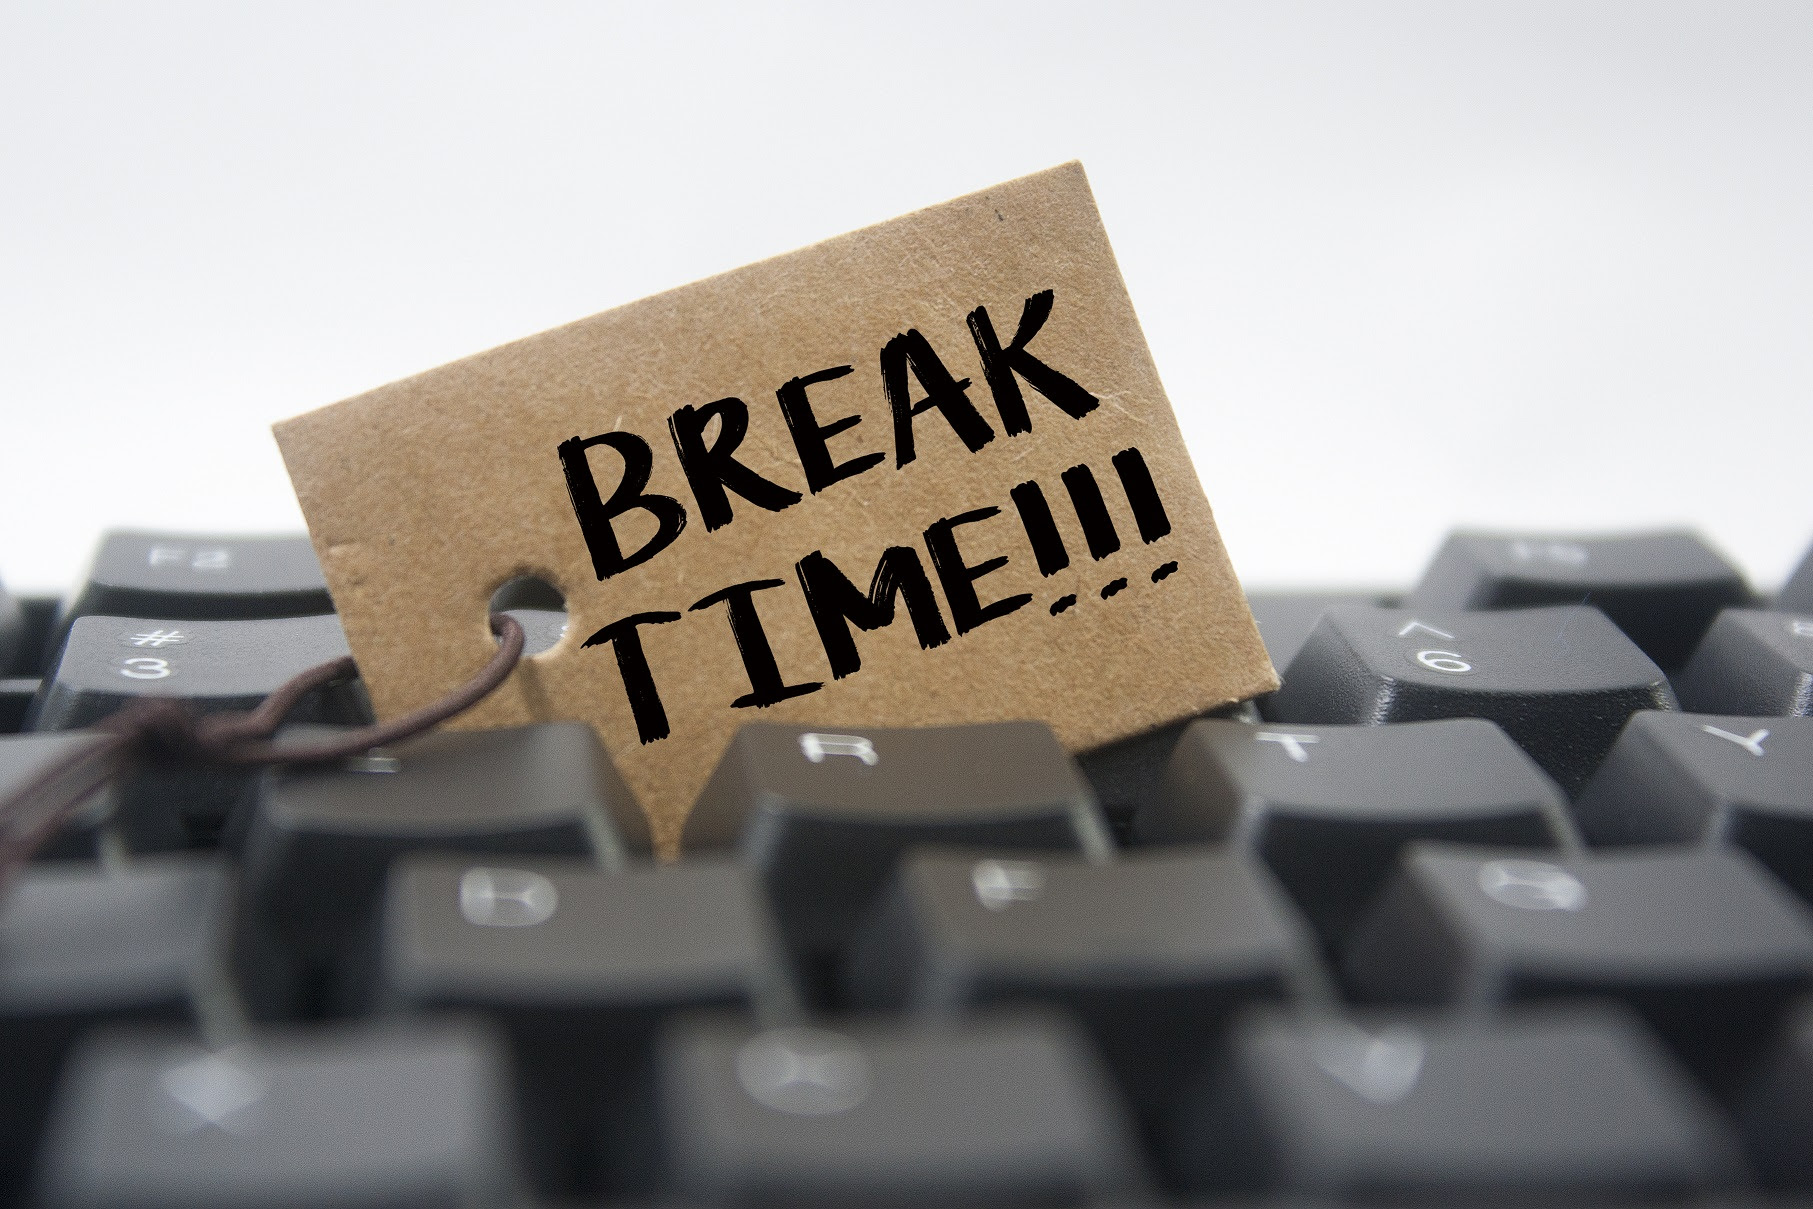 How taking a break helps with productivity